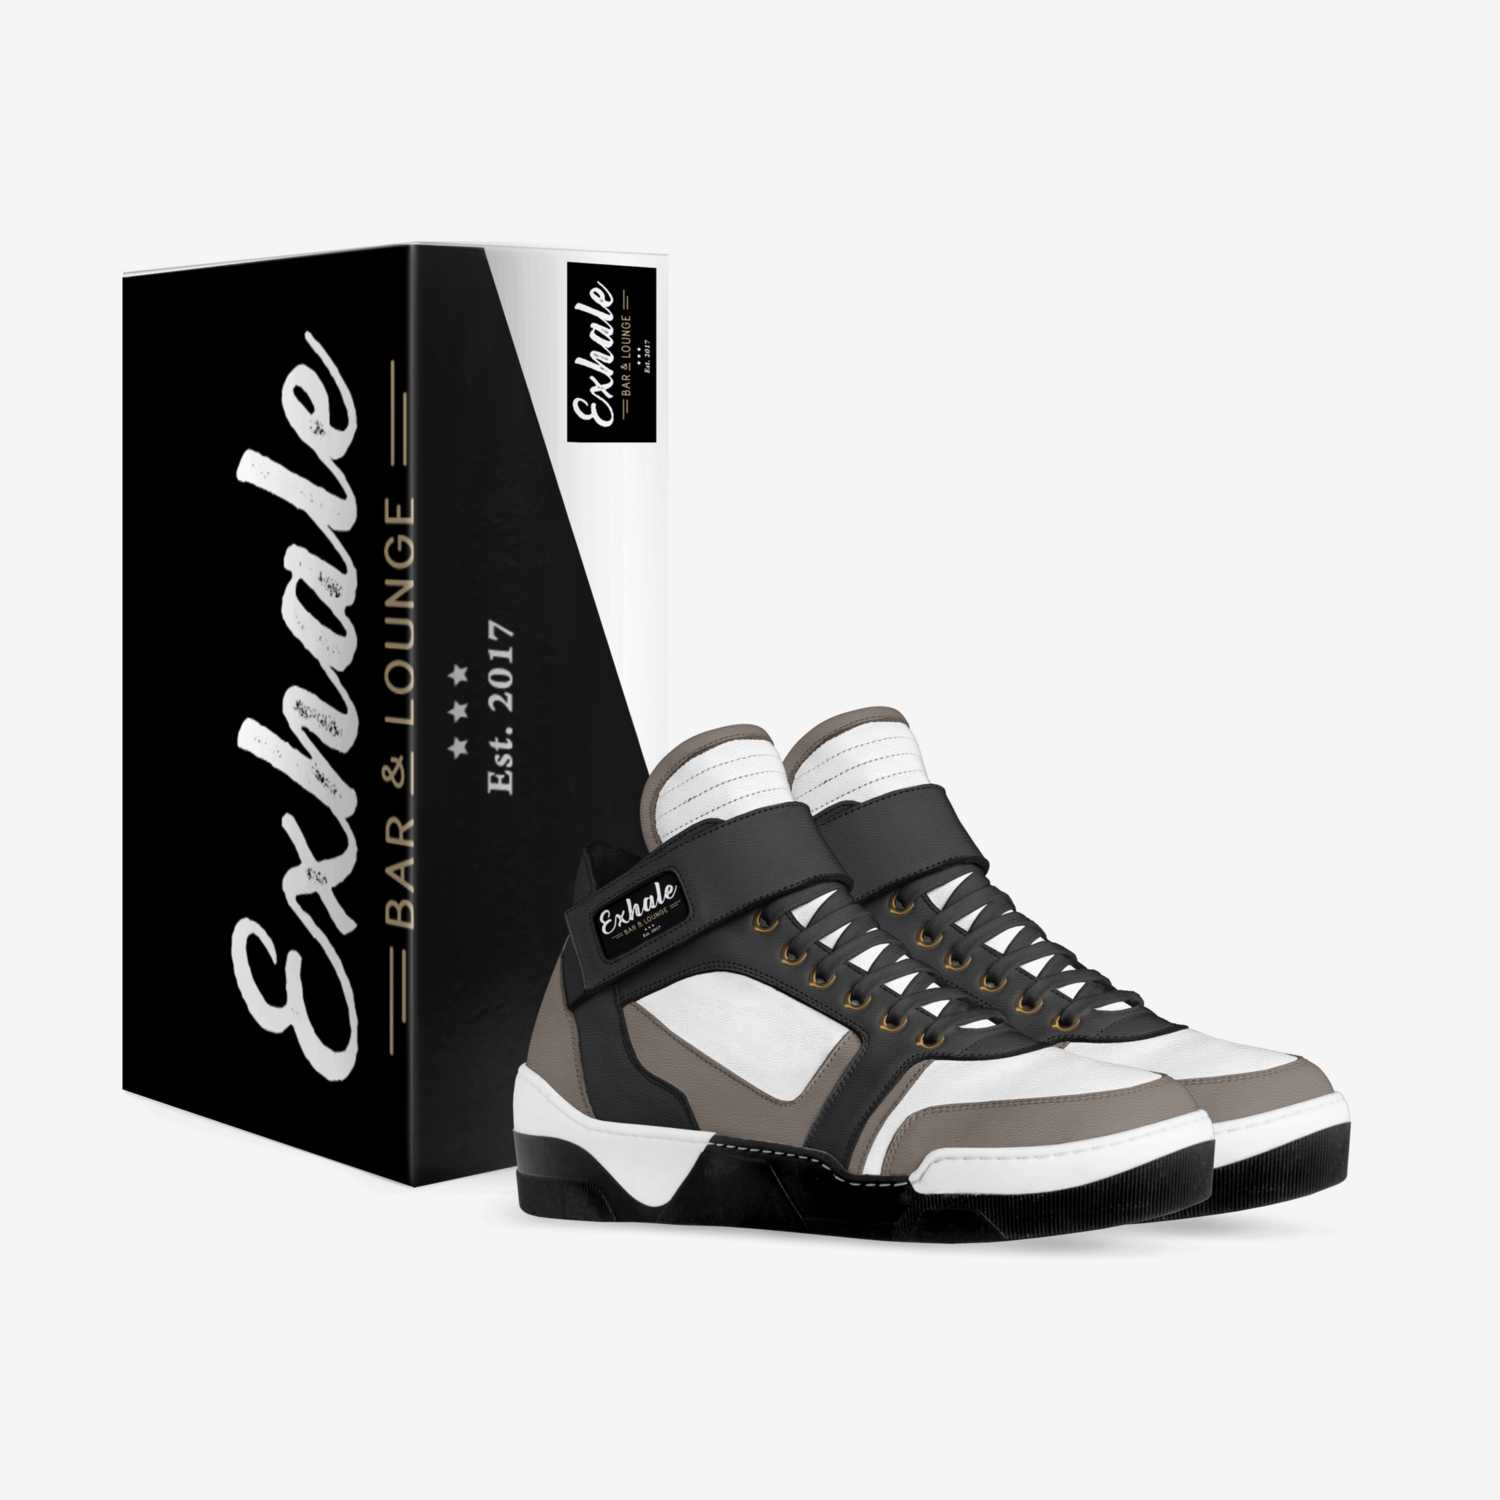 Exhale custom made in Italy shoes by Ron | Box view